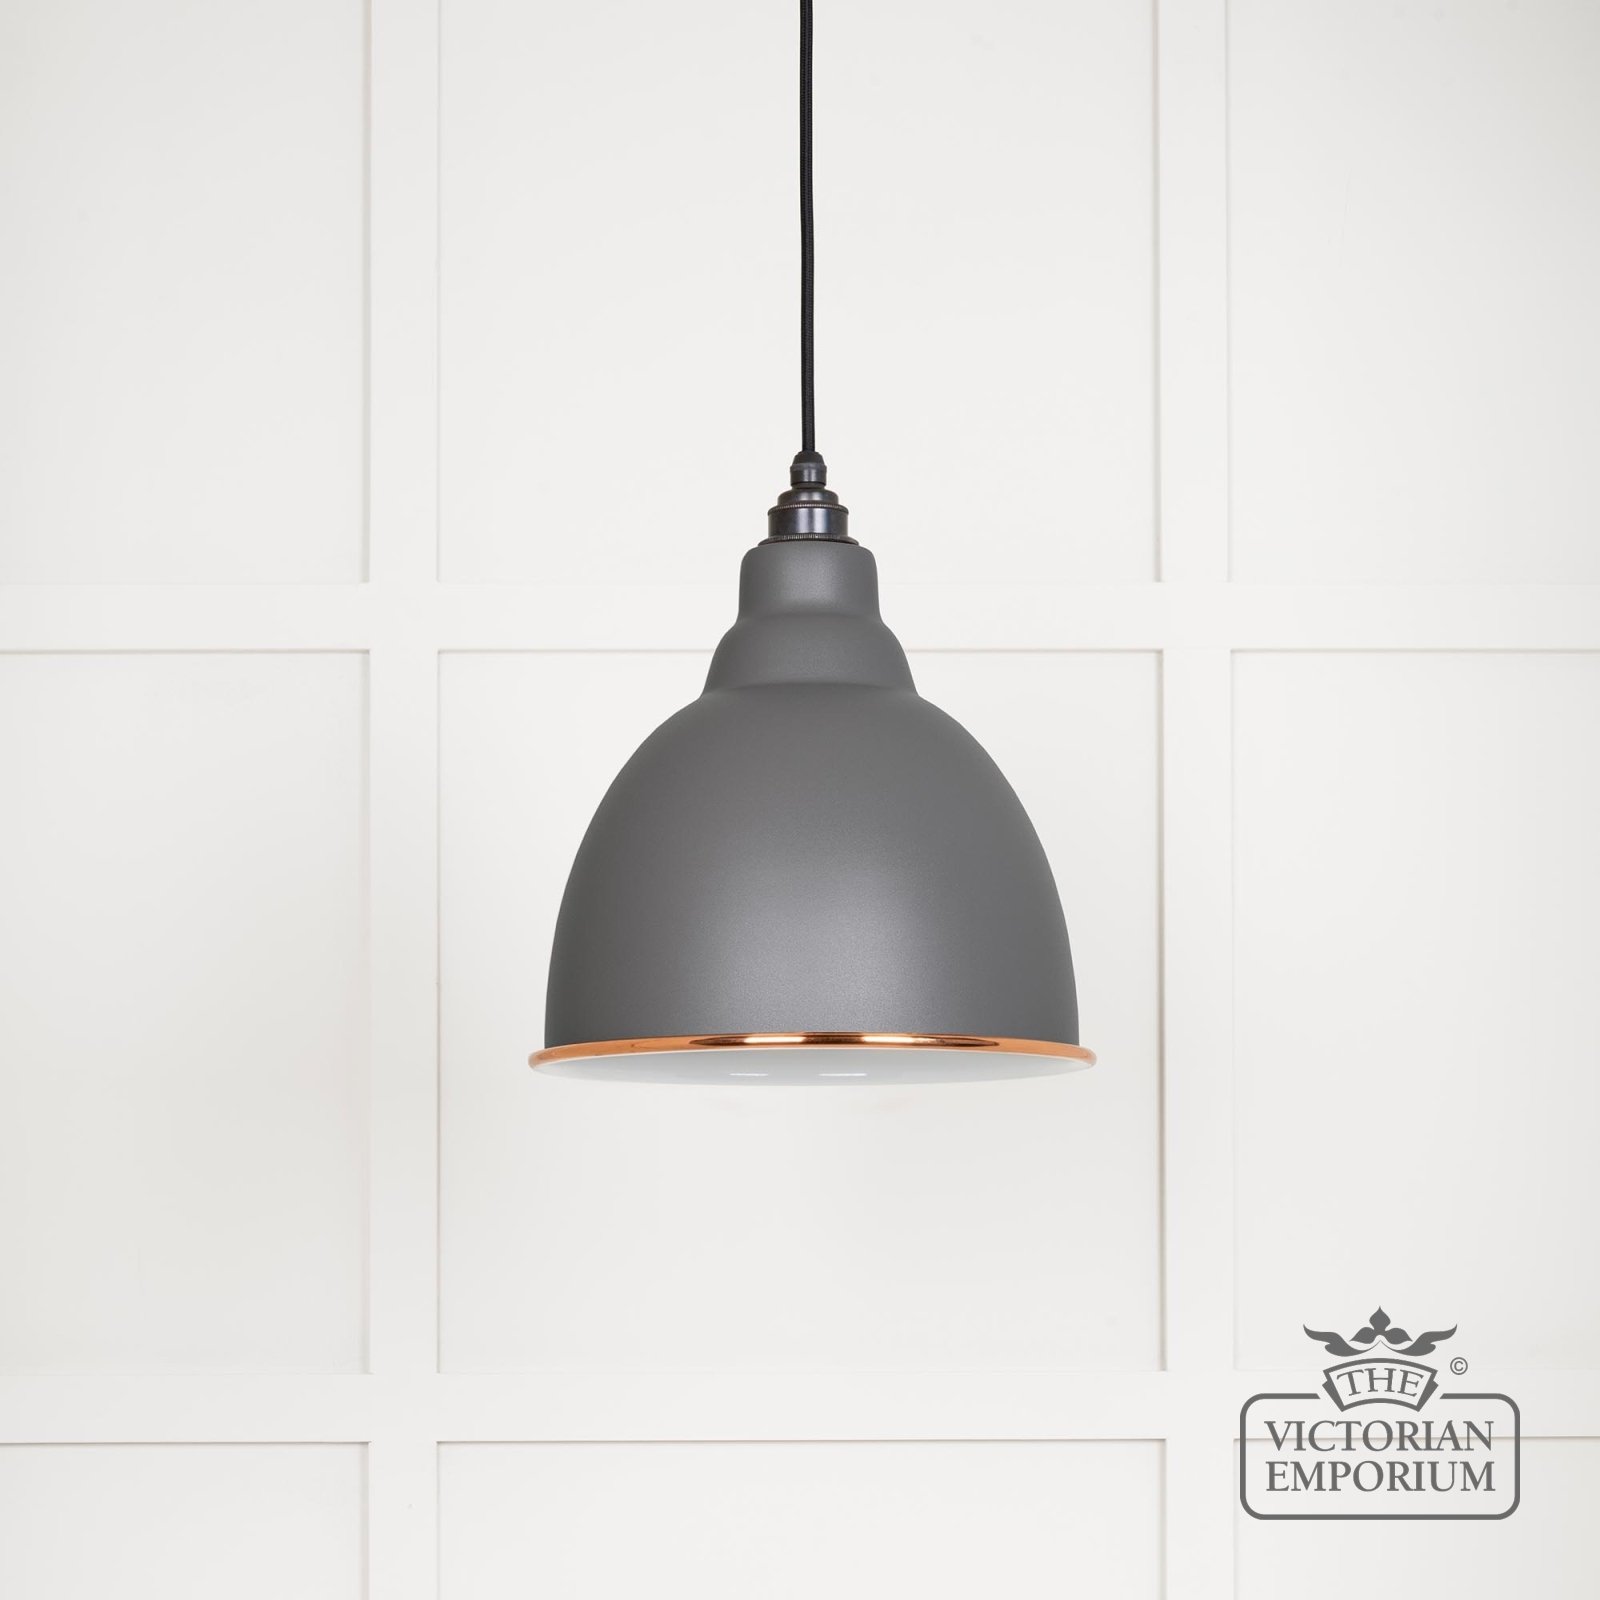 Brindle pendant light in Bluff with white gloss interior